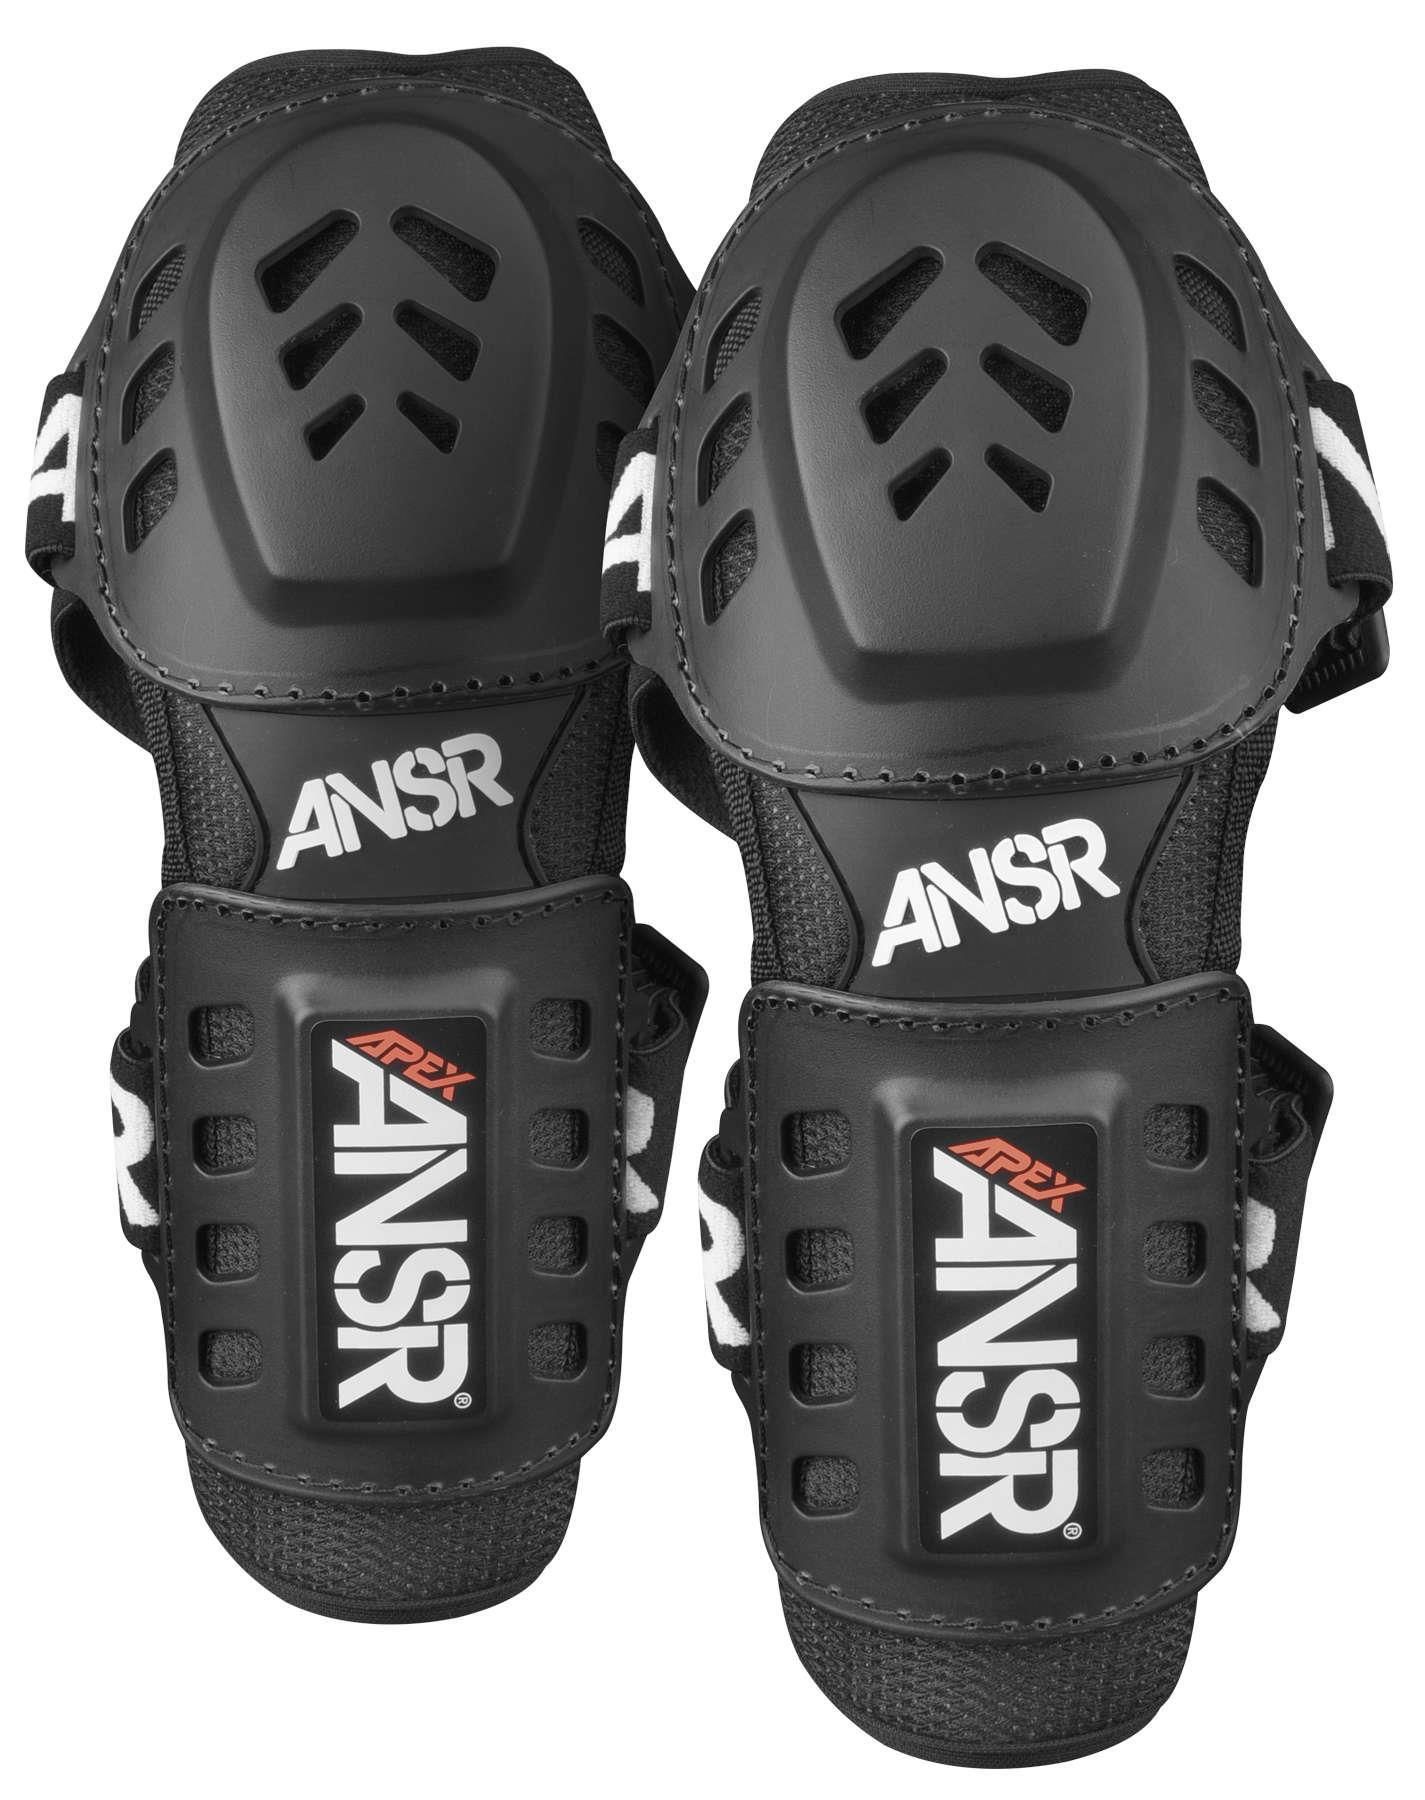 3O6Z-ANSWER-018107 Apex Youth Elbow Guards